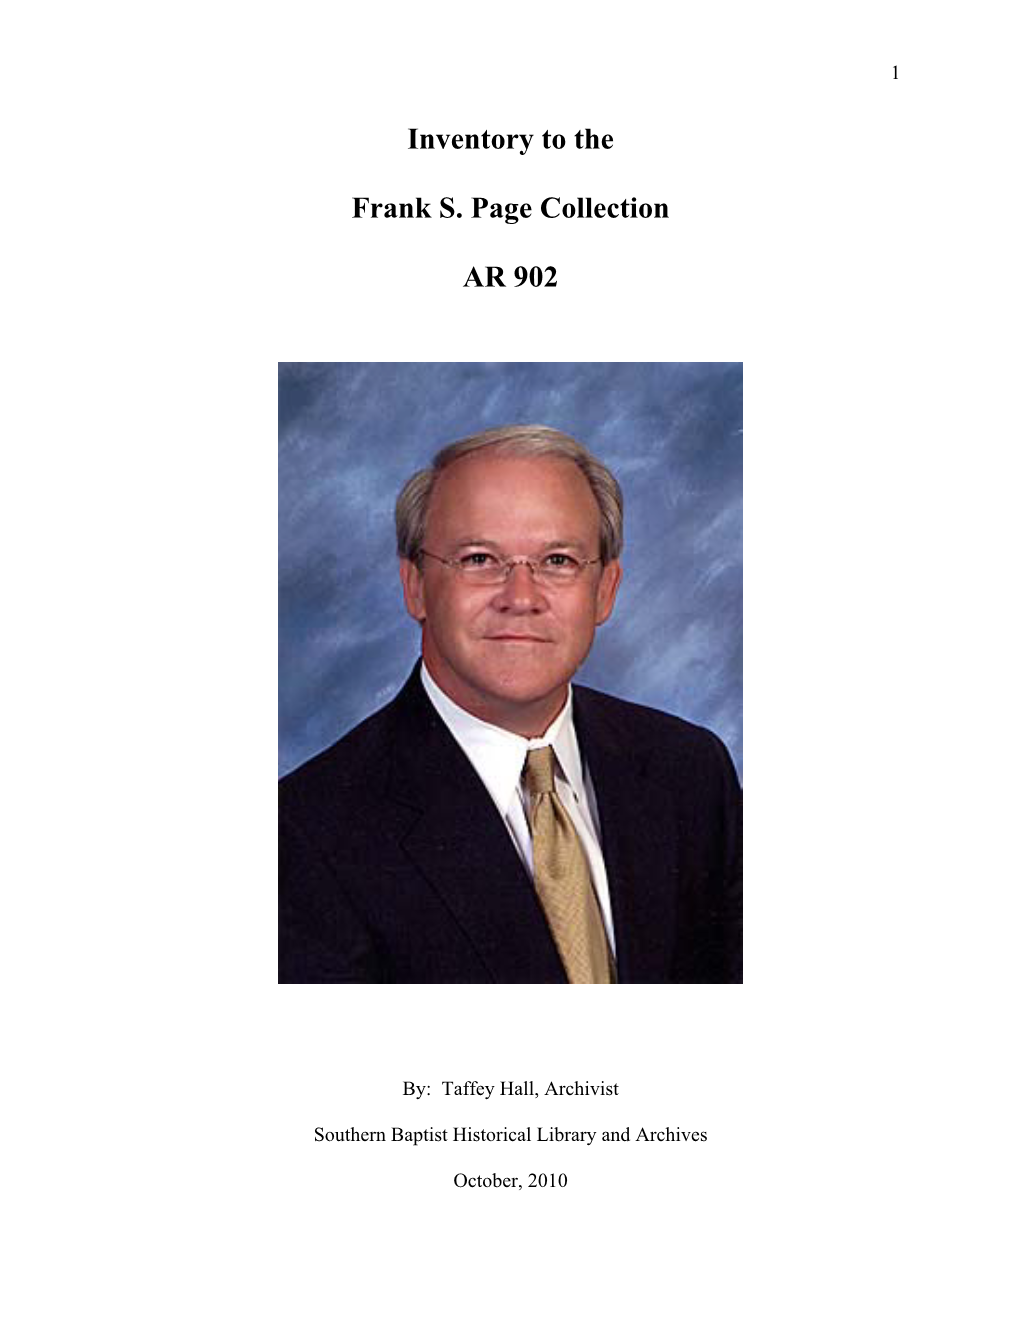 Inventory to the Frank S. Page Collection AR